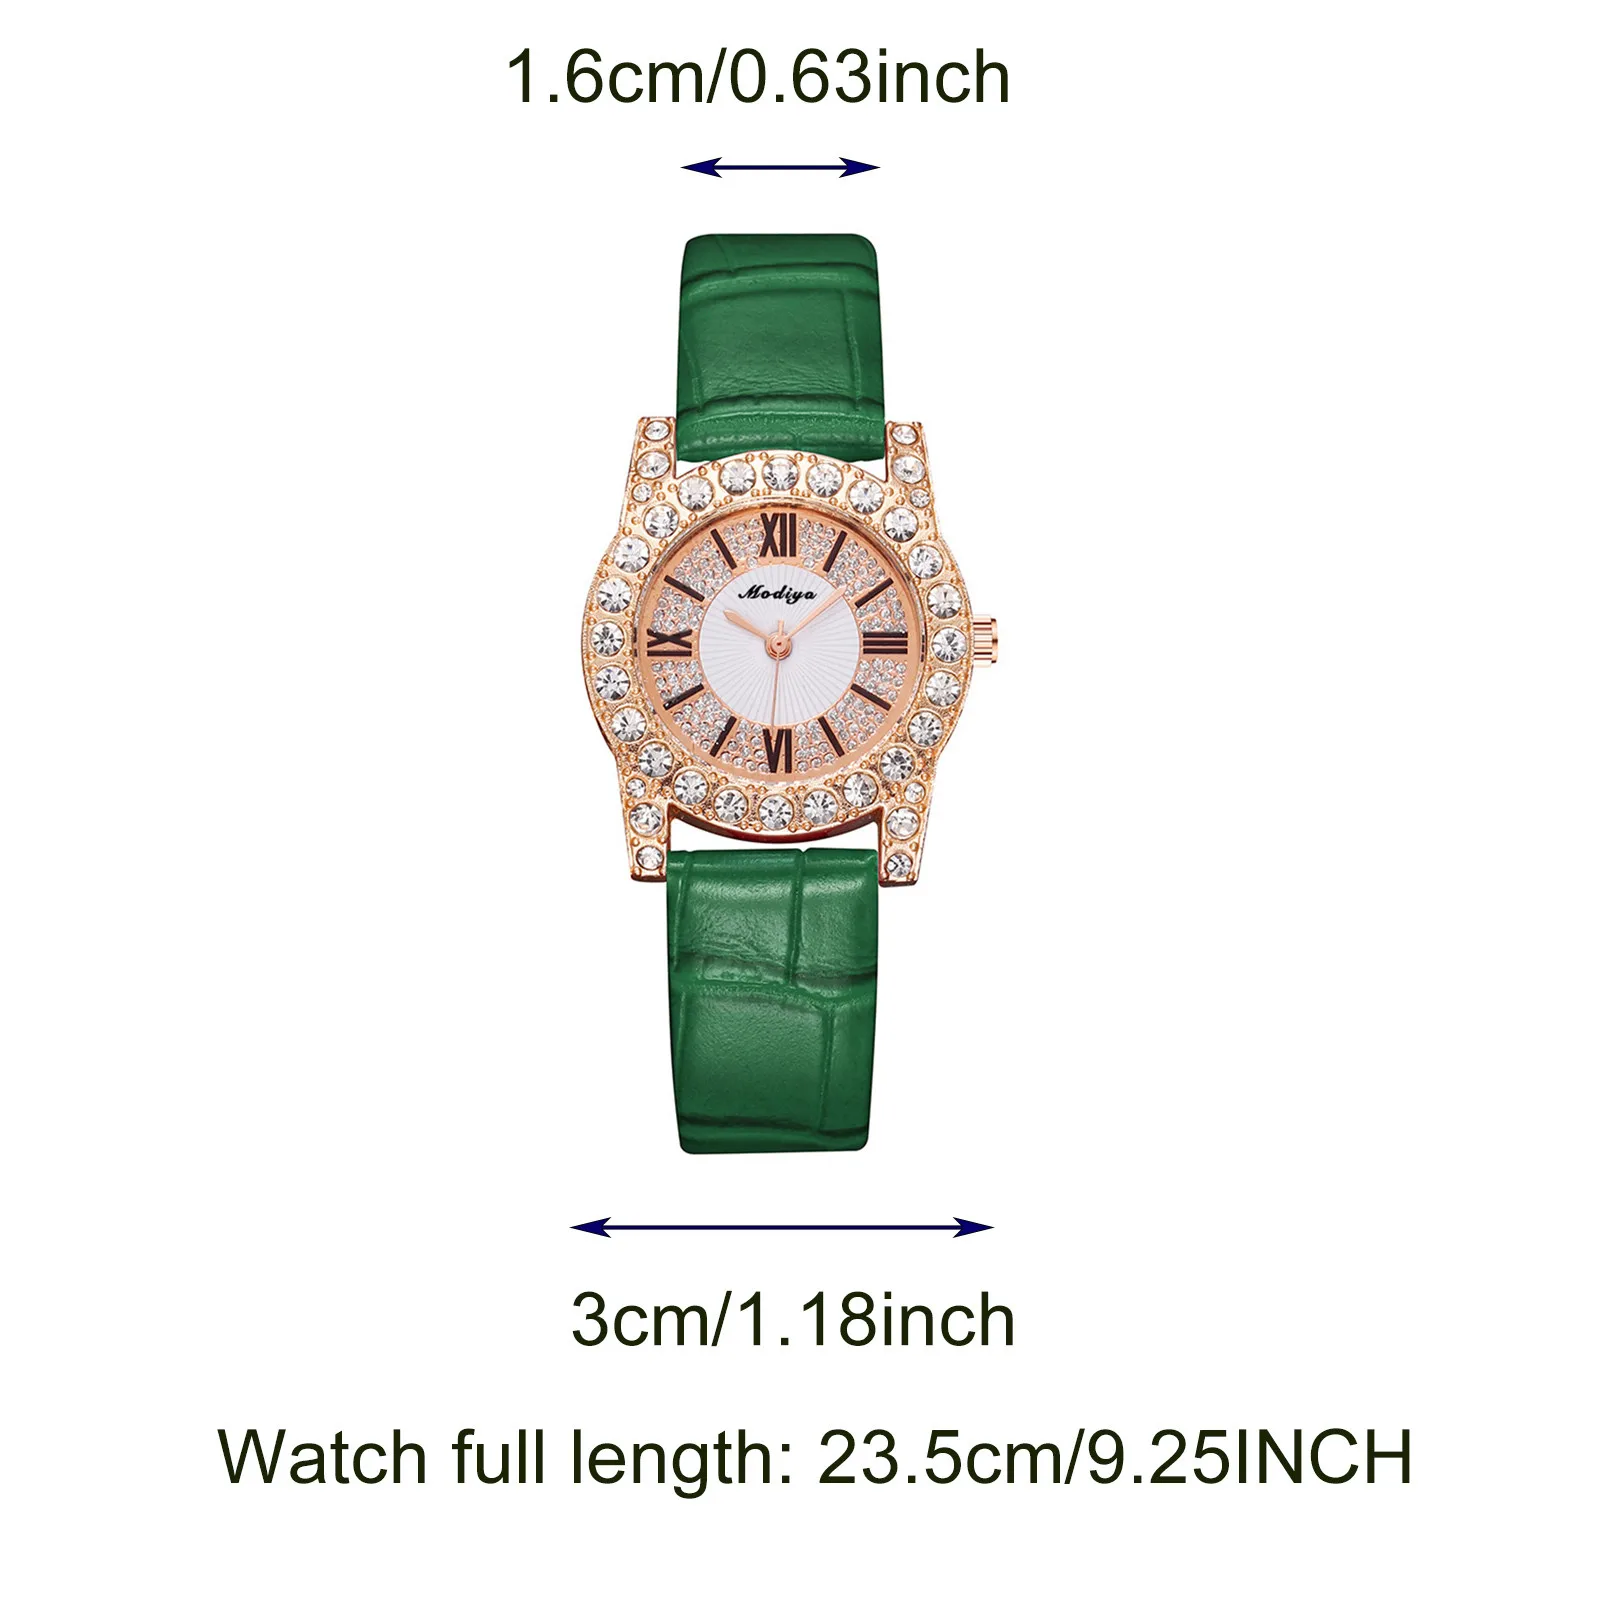 

2021 NEW Watchs Hot sale Fashion Faux Simplicity Leather Band Watch Rhinestone Roman Scale Female Watch Gift to girlfriend